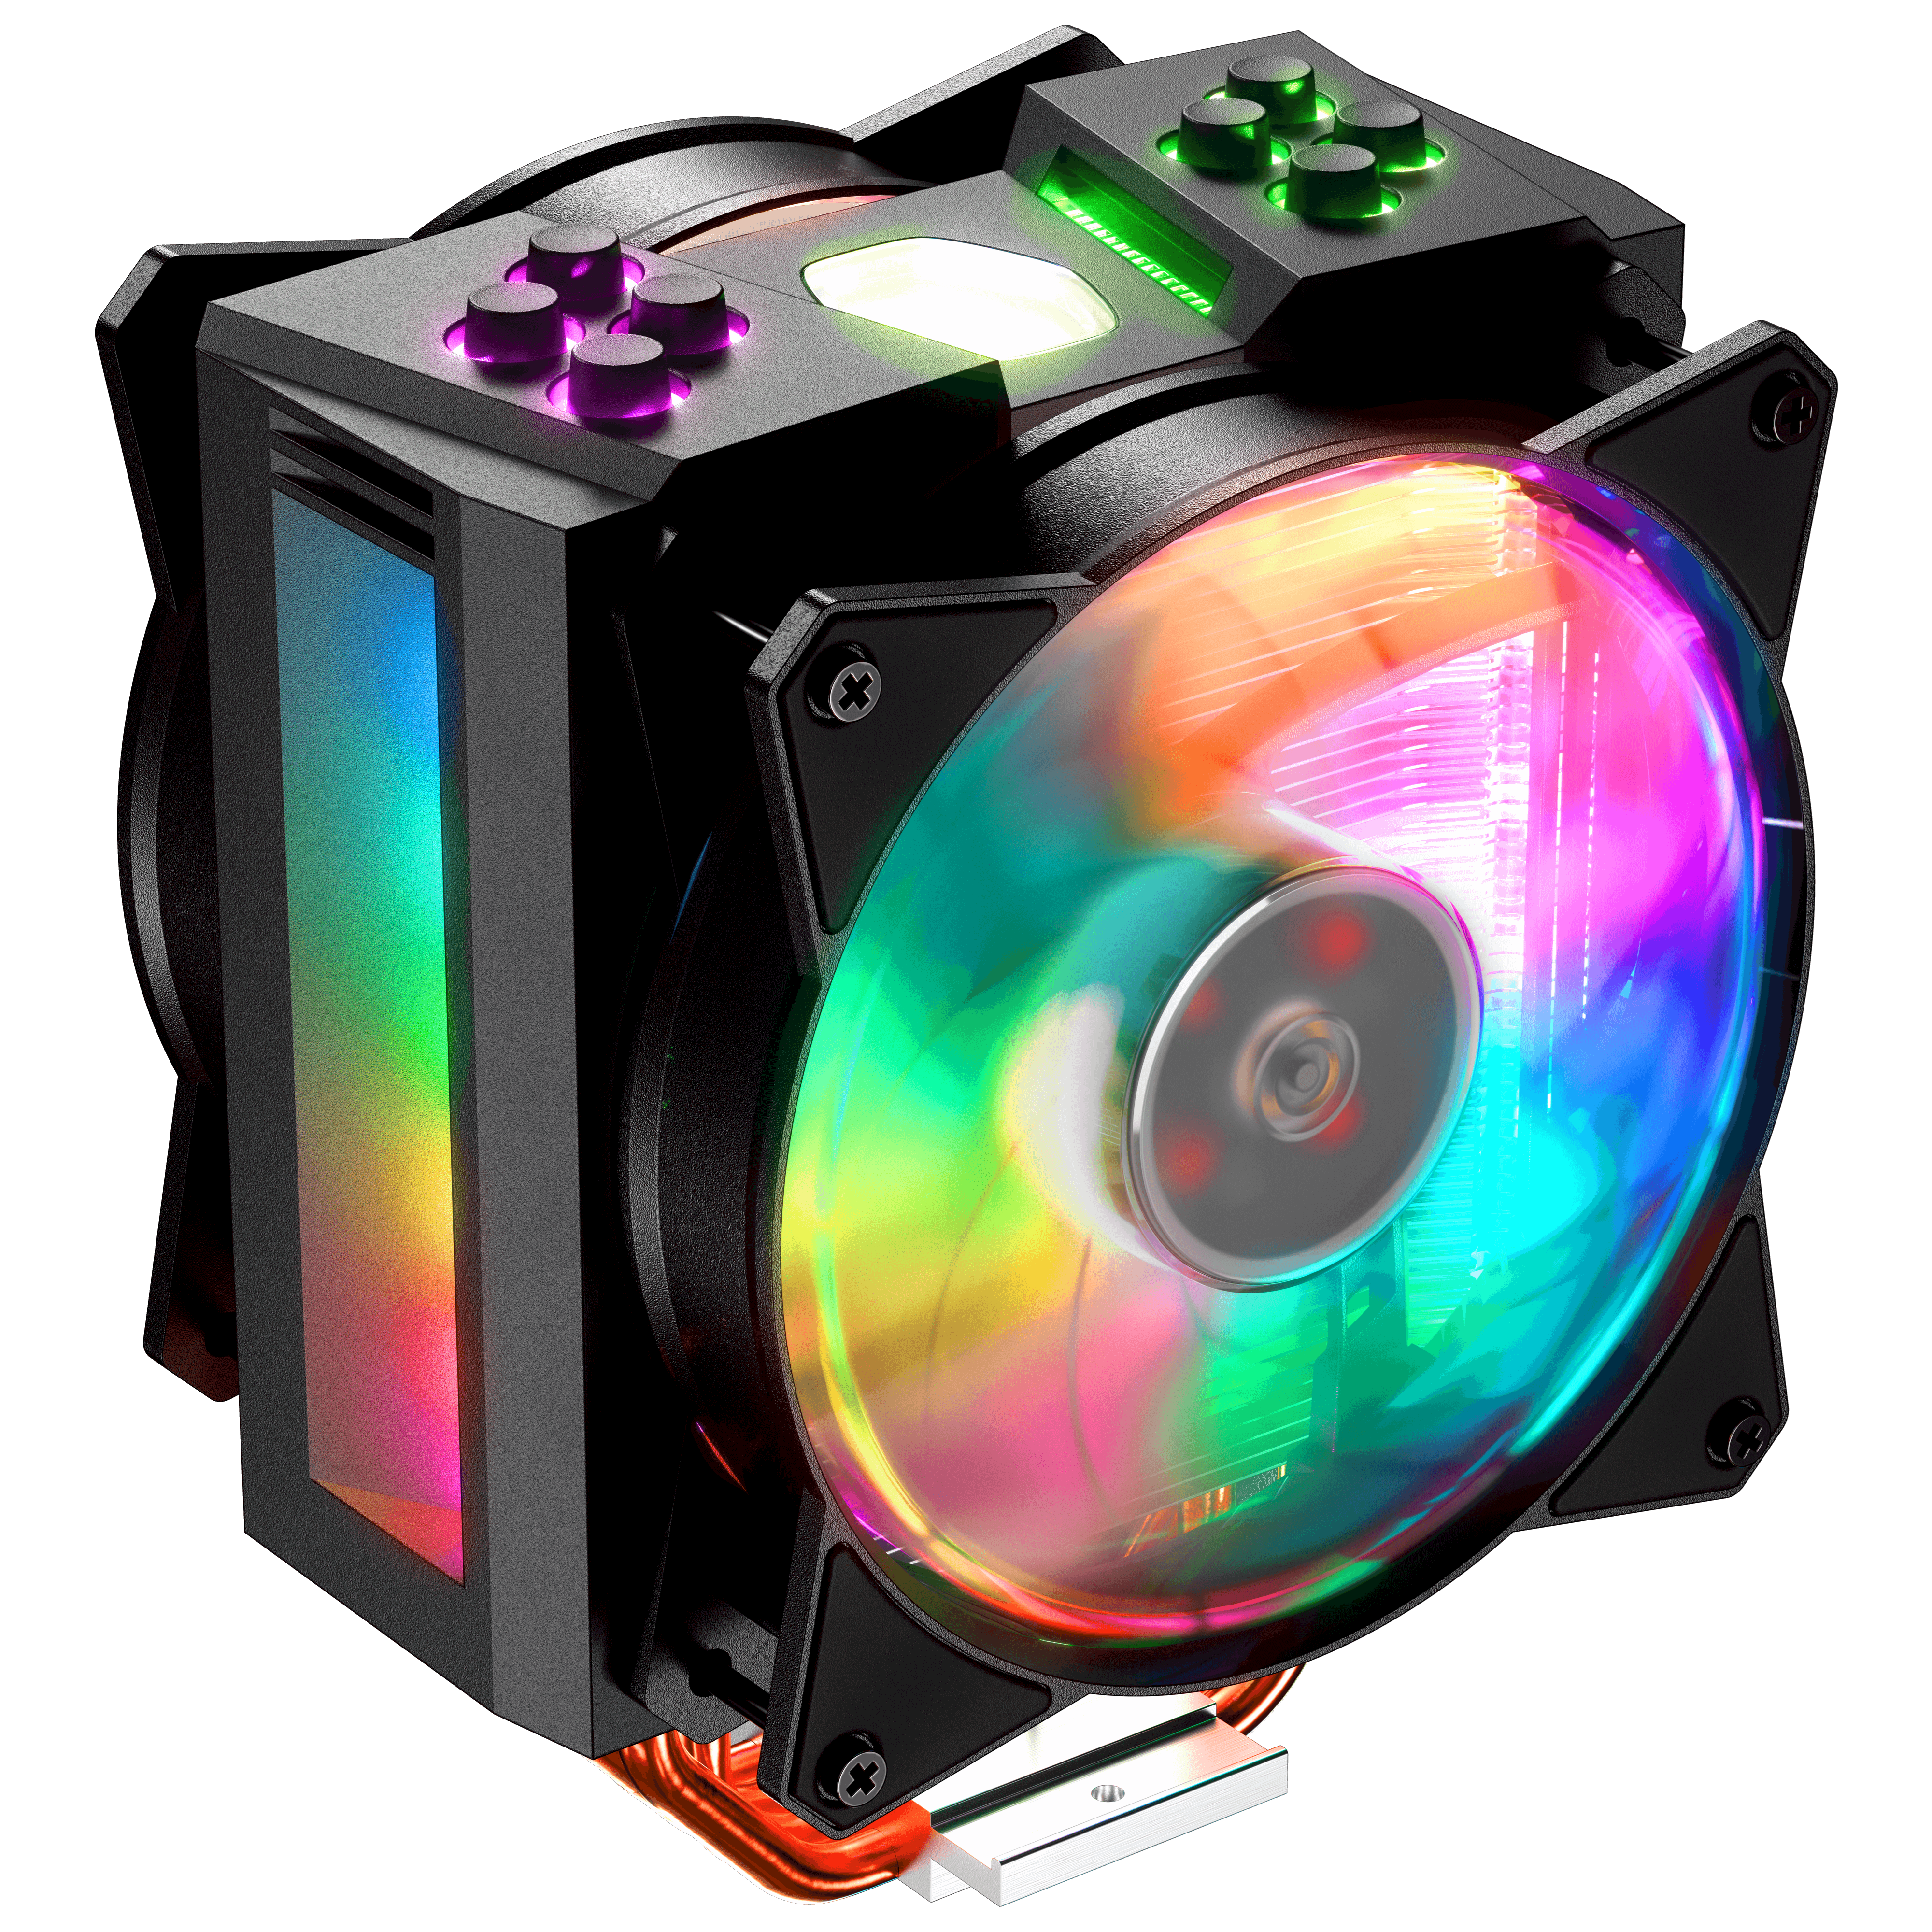 Cooler Master MAP-T6PN-218PC-R1 RGB CPU Air Cooler 6 CDC Heat Pipes Master Fan 120mm Intel/AMD AM4 Support 